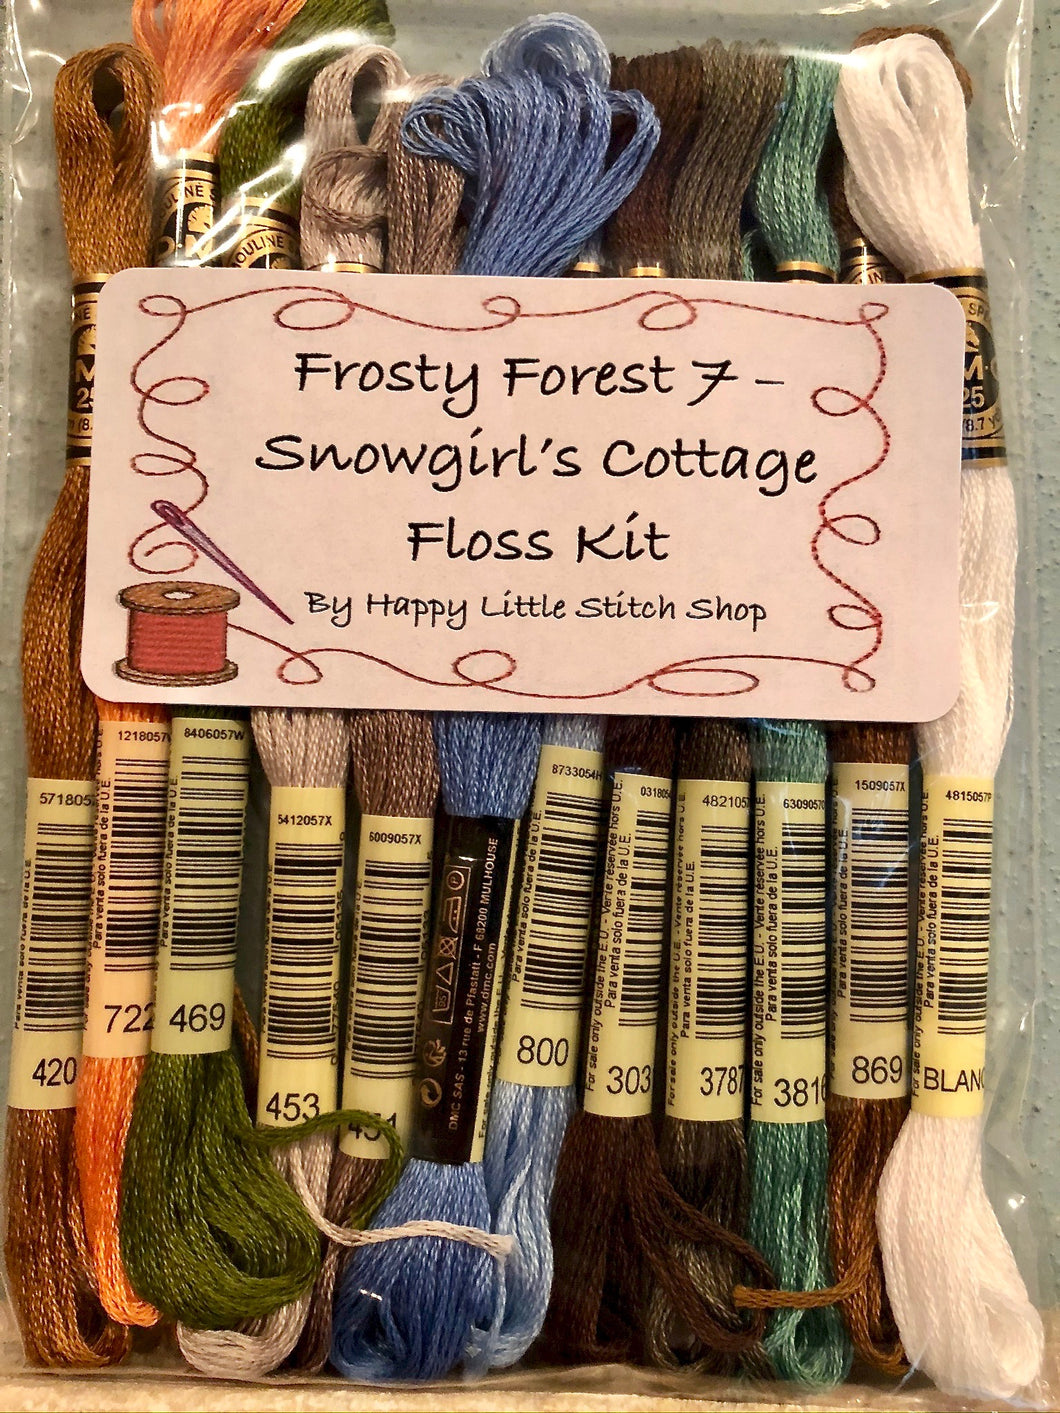 Floss Kit - Frosty Forest 7 - Snowgirl's Cottage